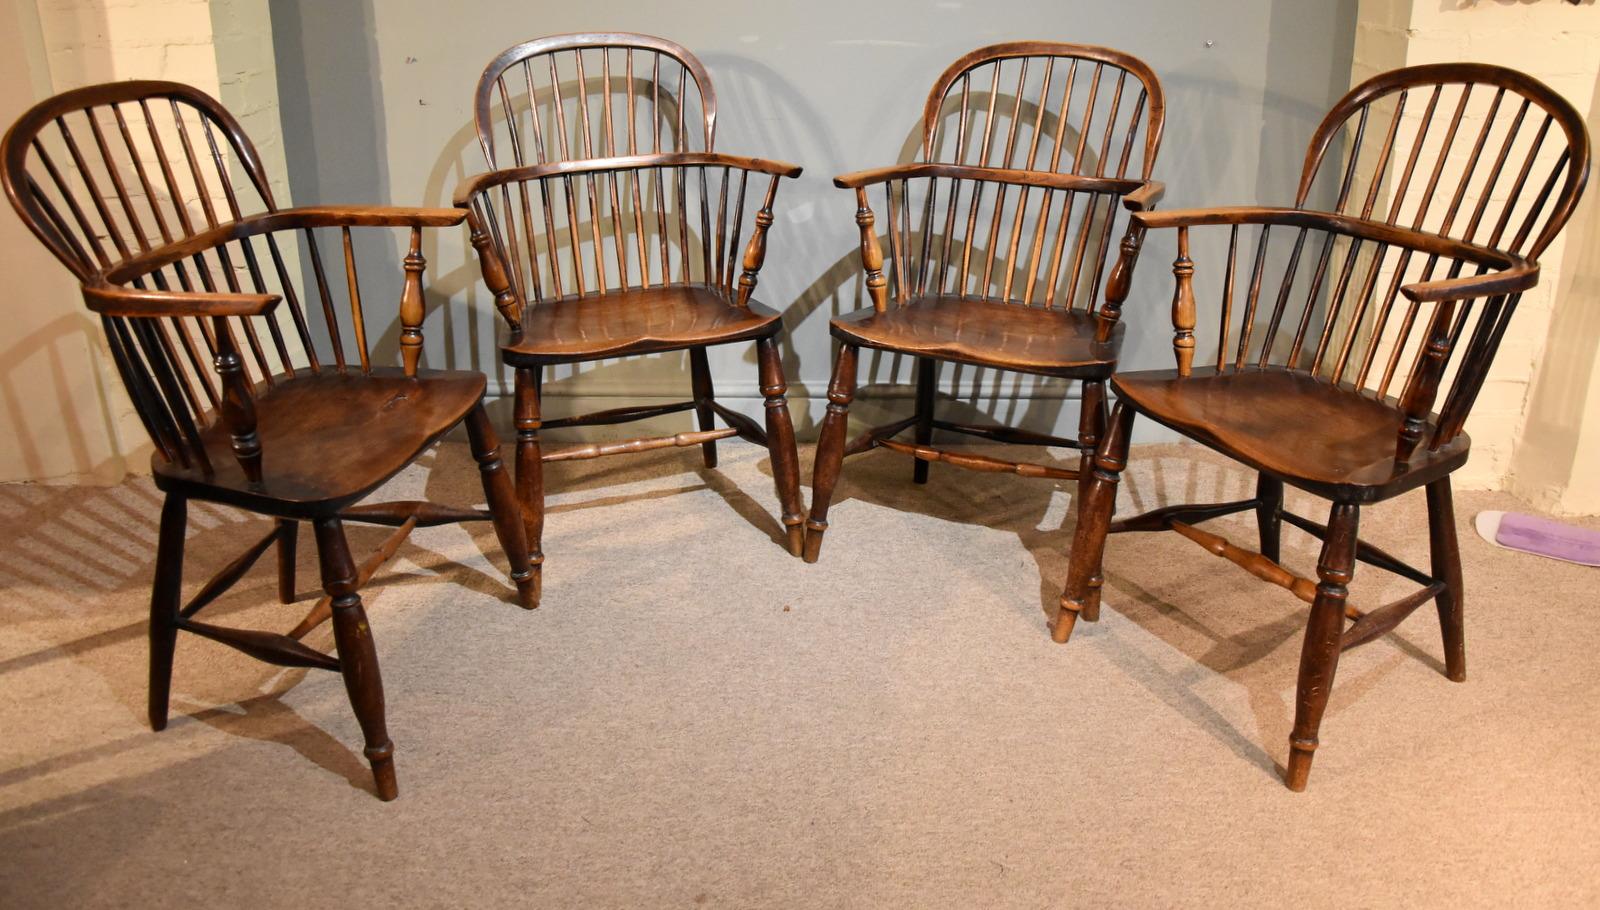 A Superb set of four George III ash and elm Windsor chairs of good colour

Dimensions 
Height 40.5